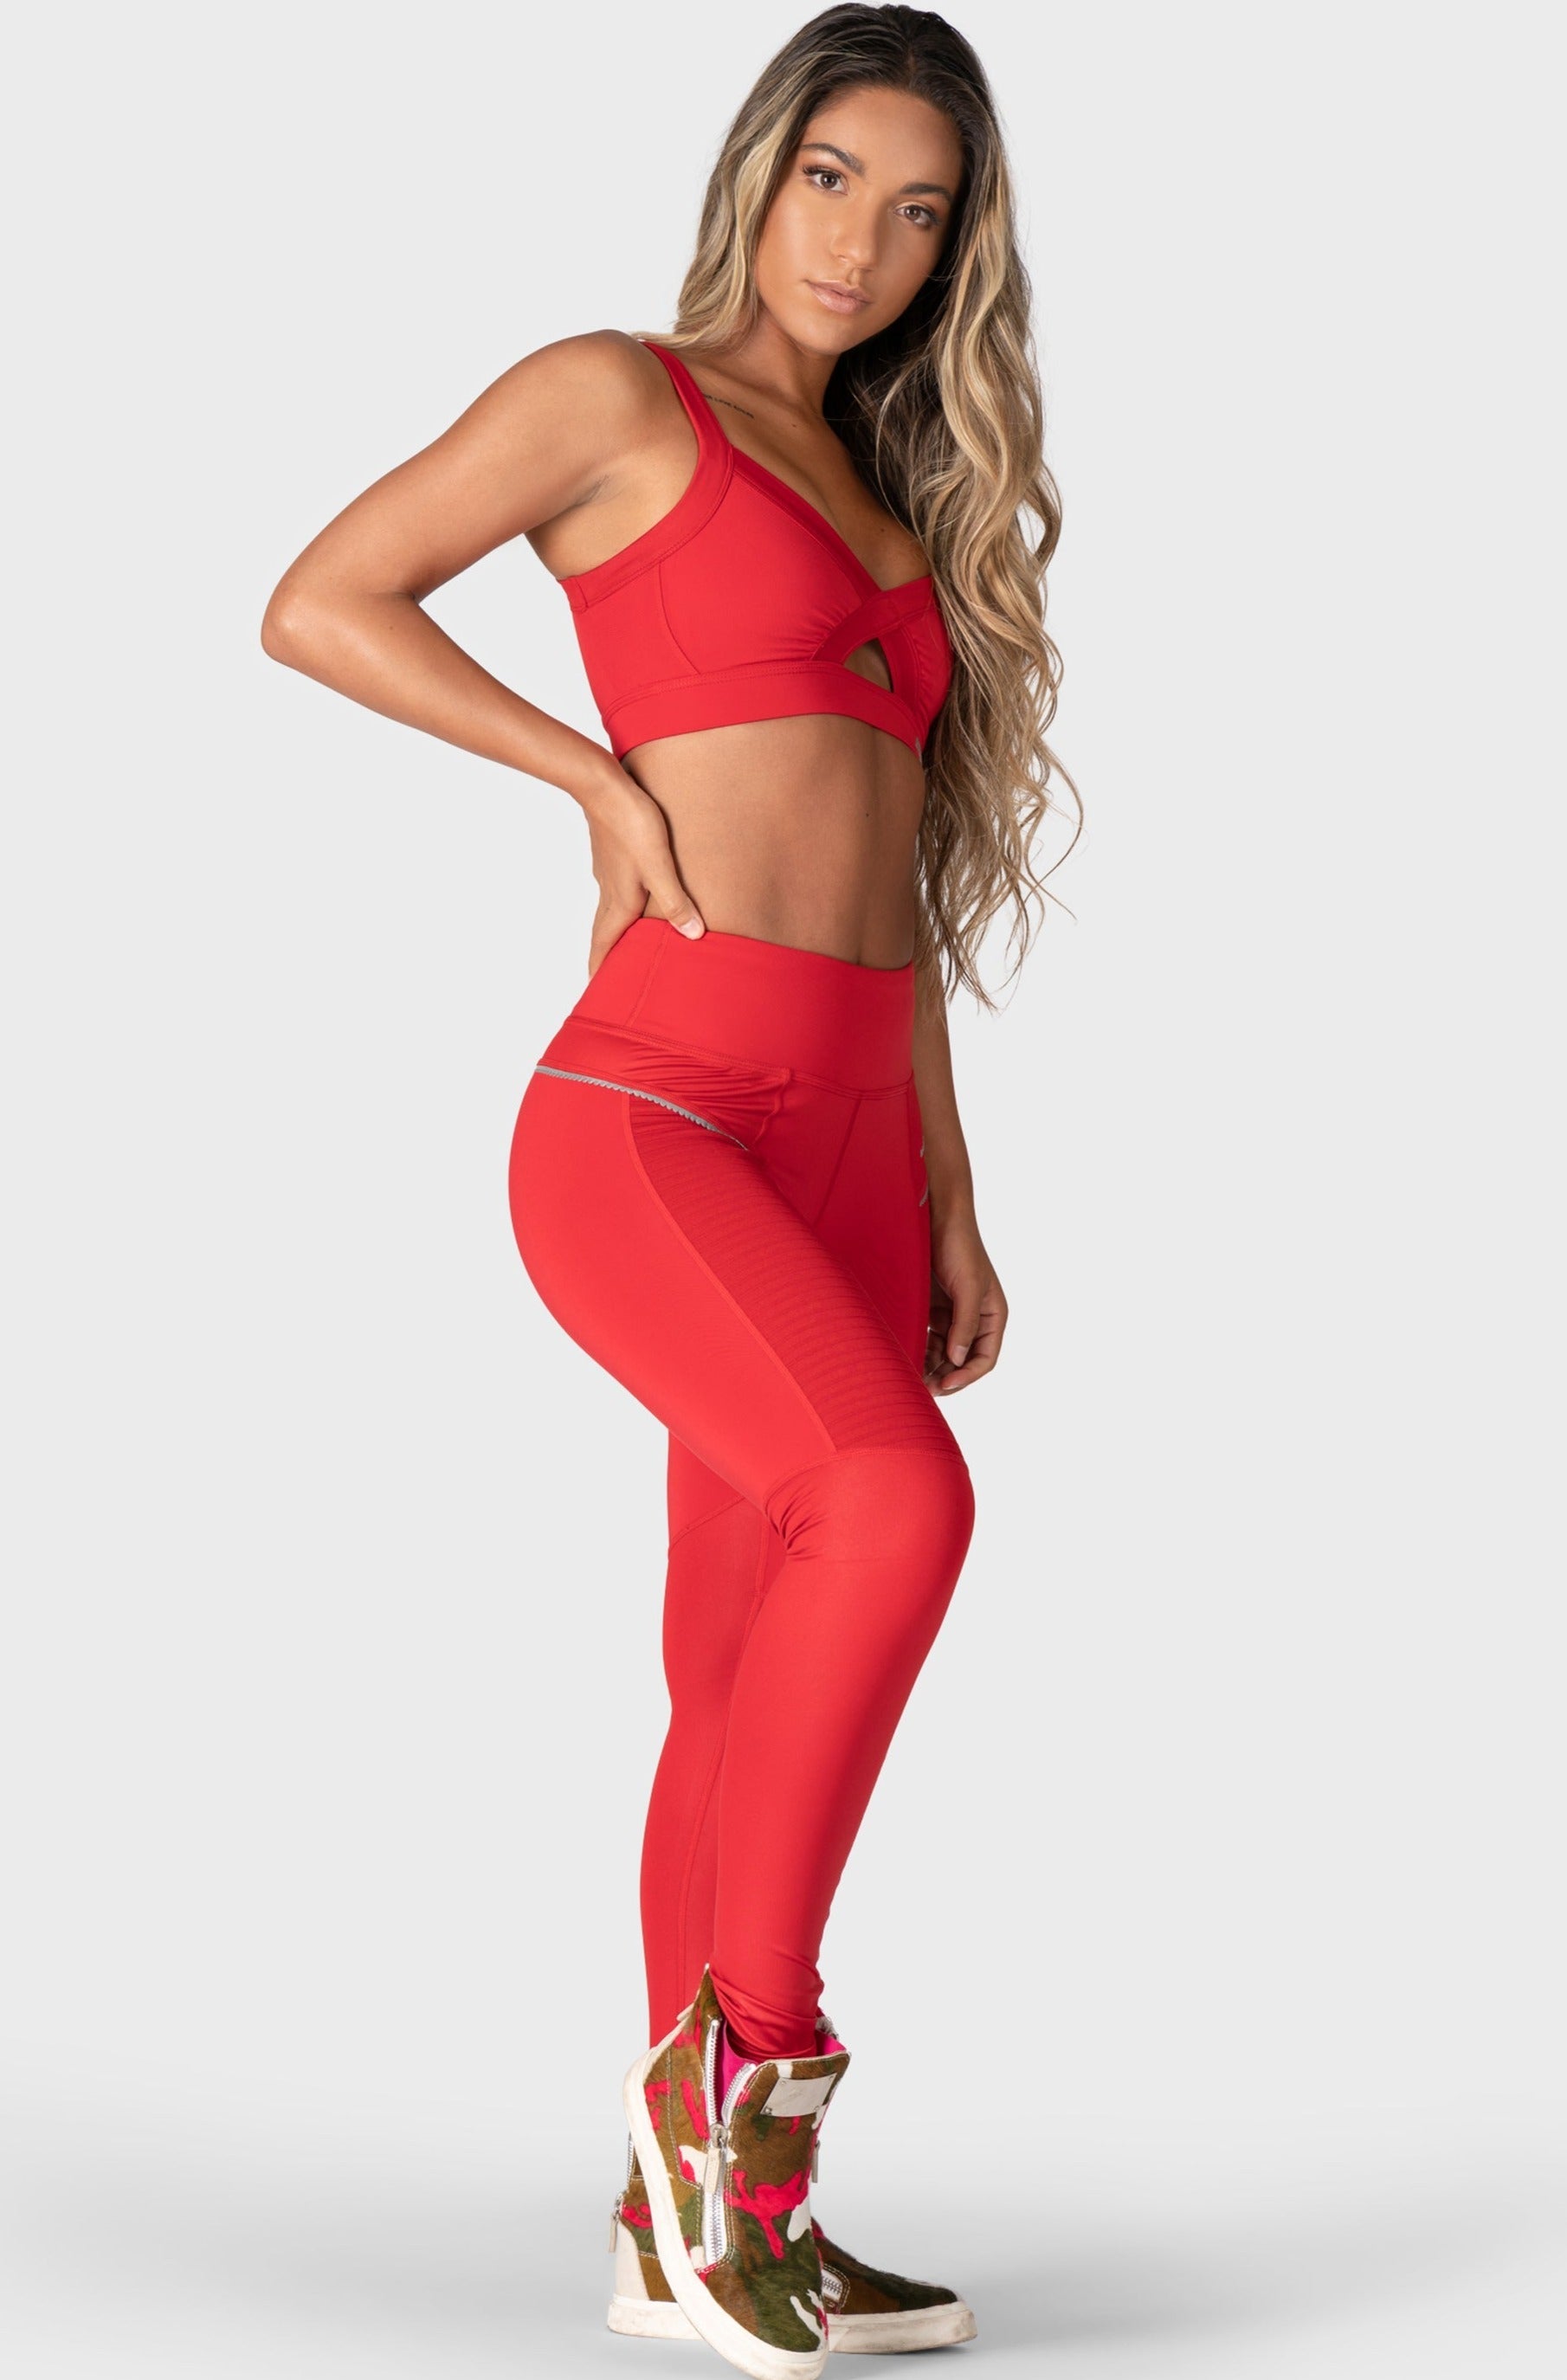 Reply to @anndamntastic # #prime leggings for CHEAP! Use